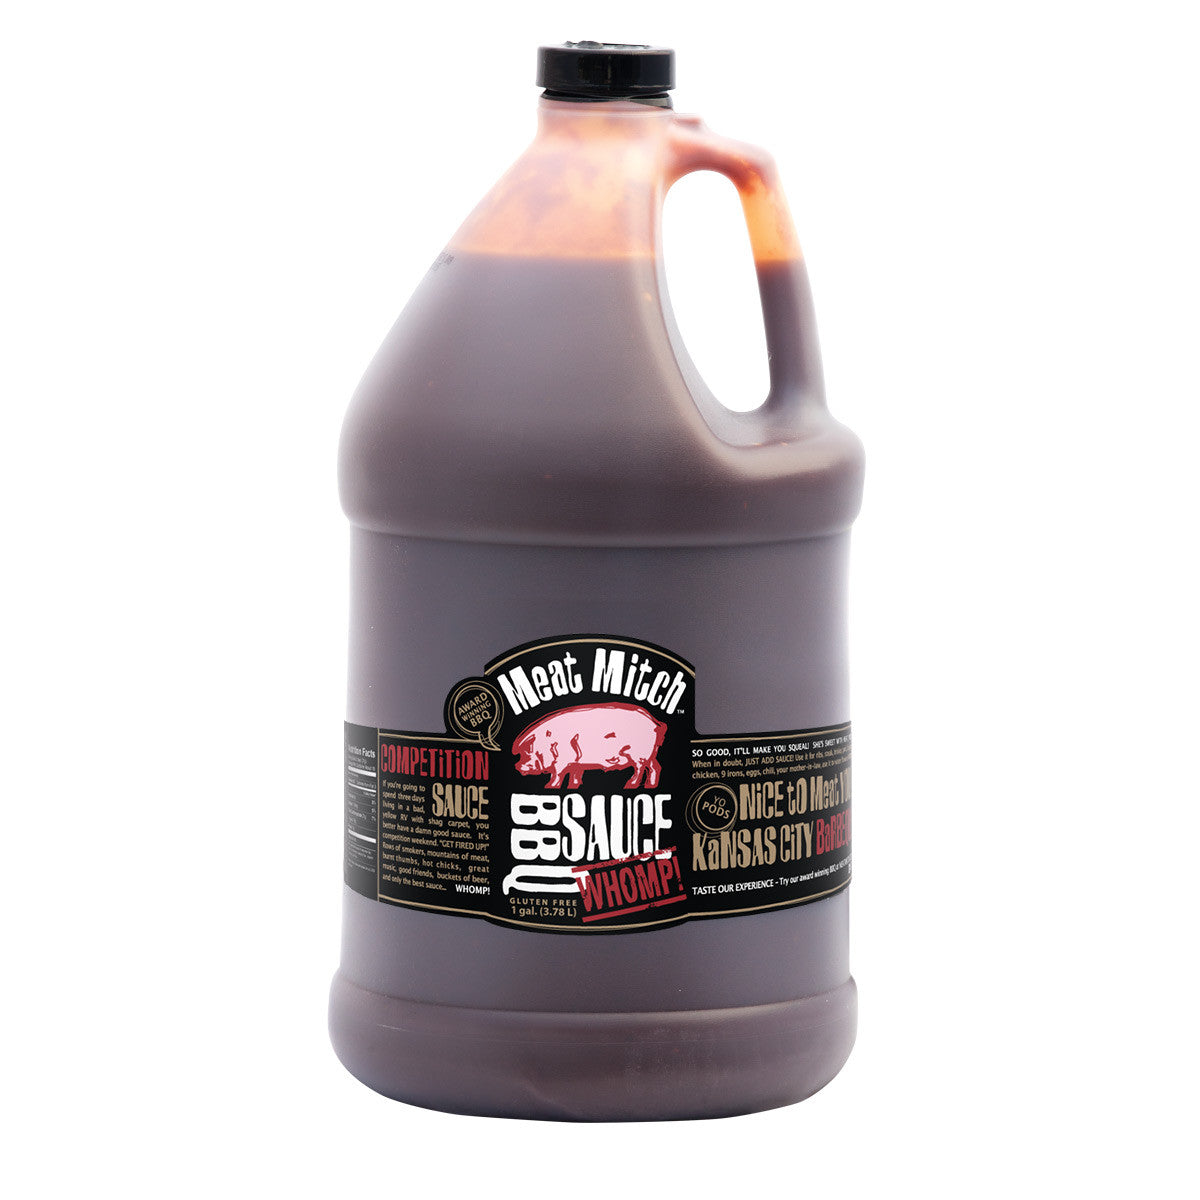 Meat Mitch Barbecue Sauce Review: We Have a Winner!